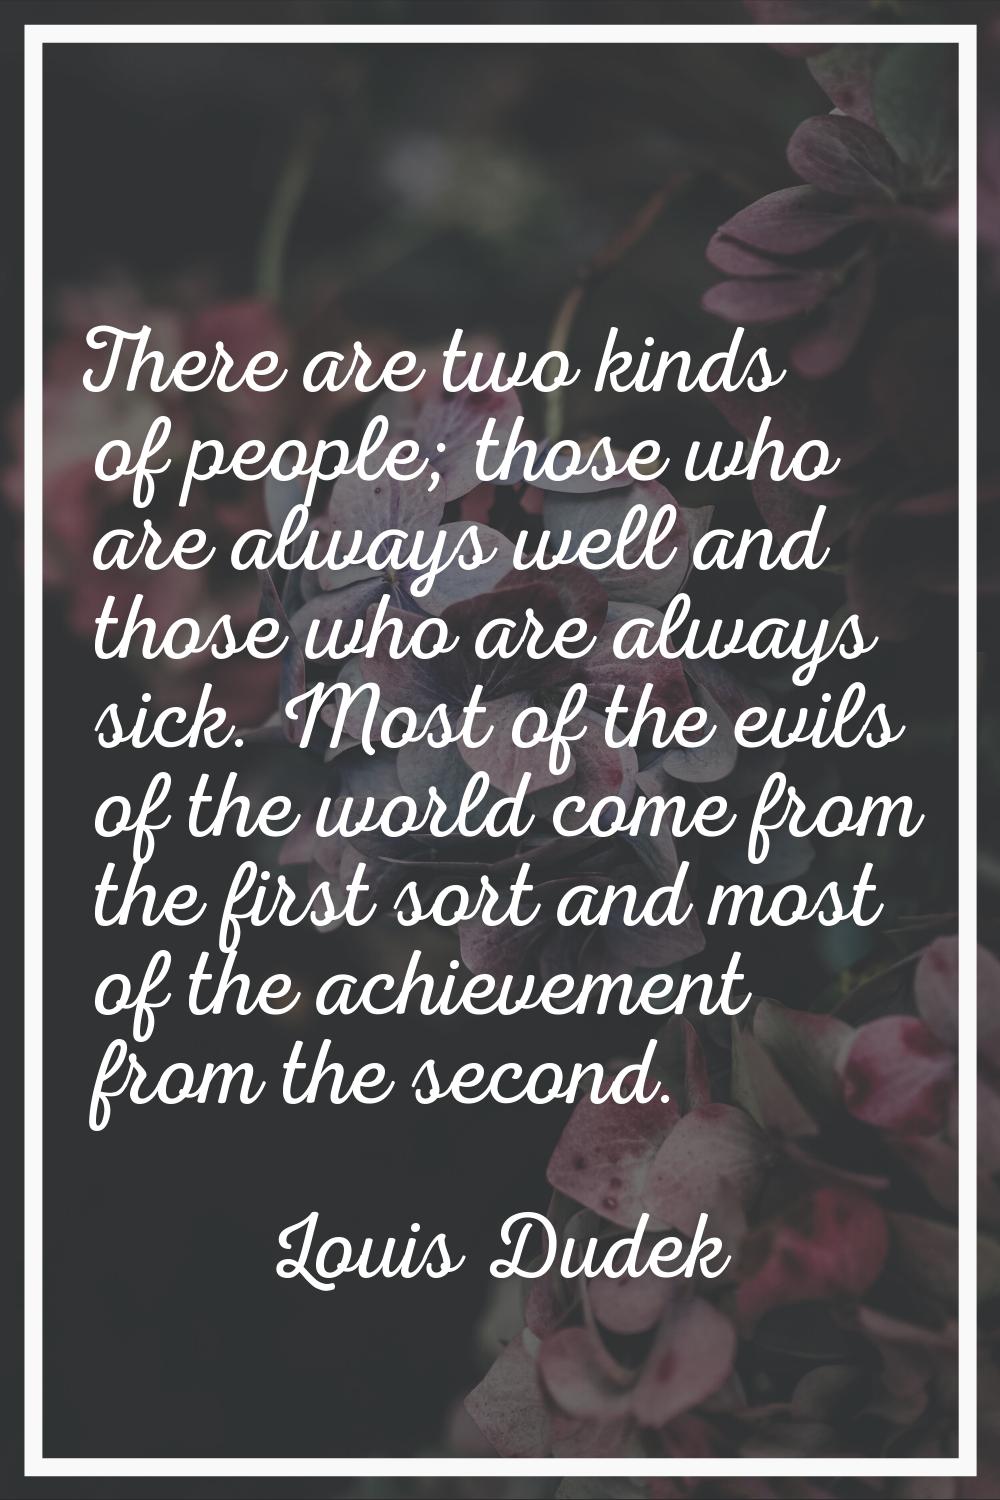 There are two kinds of people; those who are always well and those who are always sick. Most of the